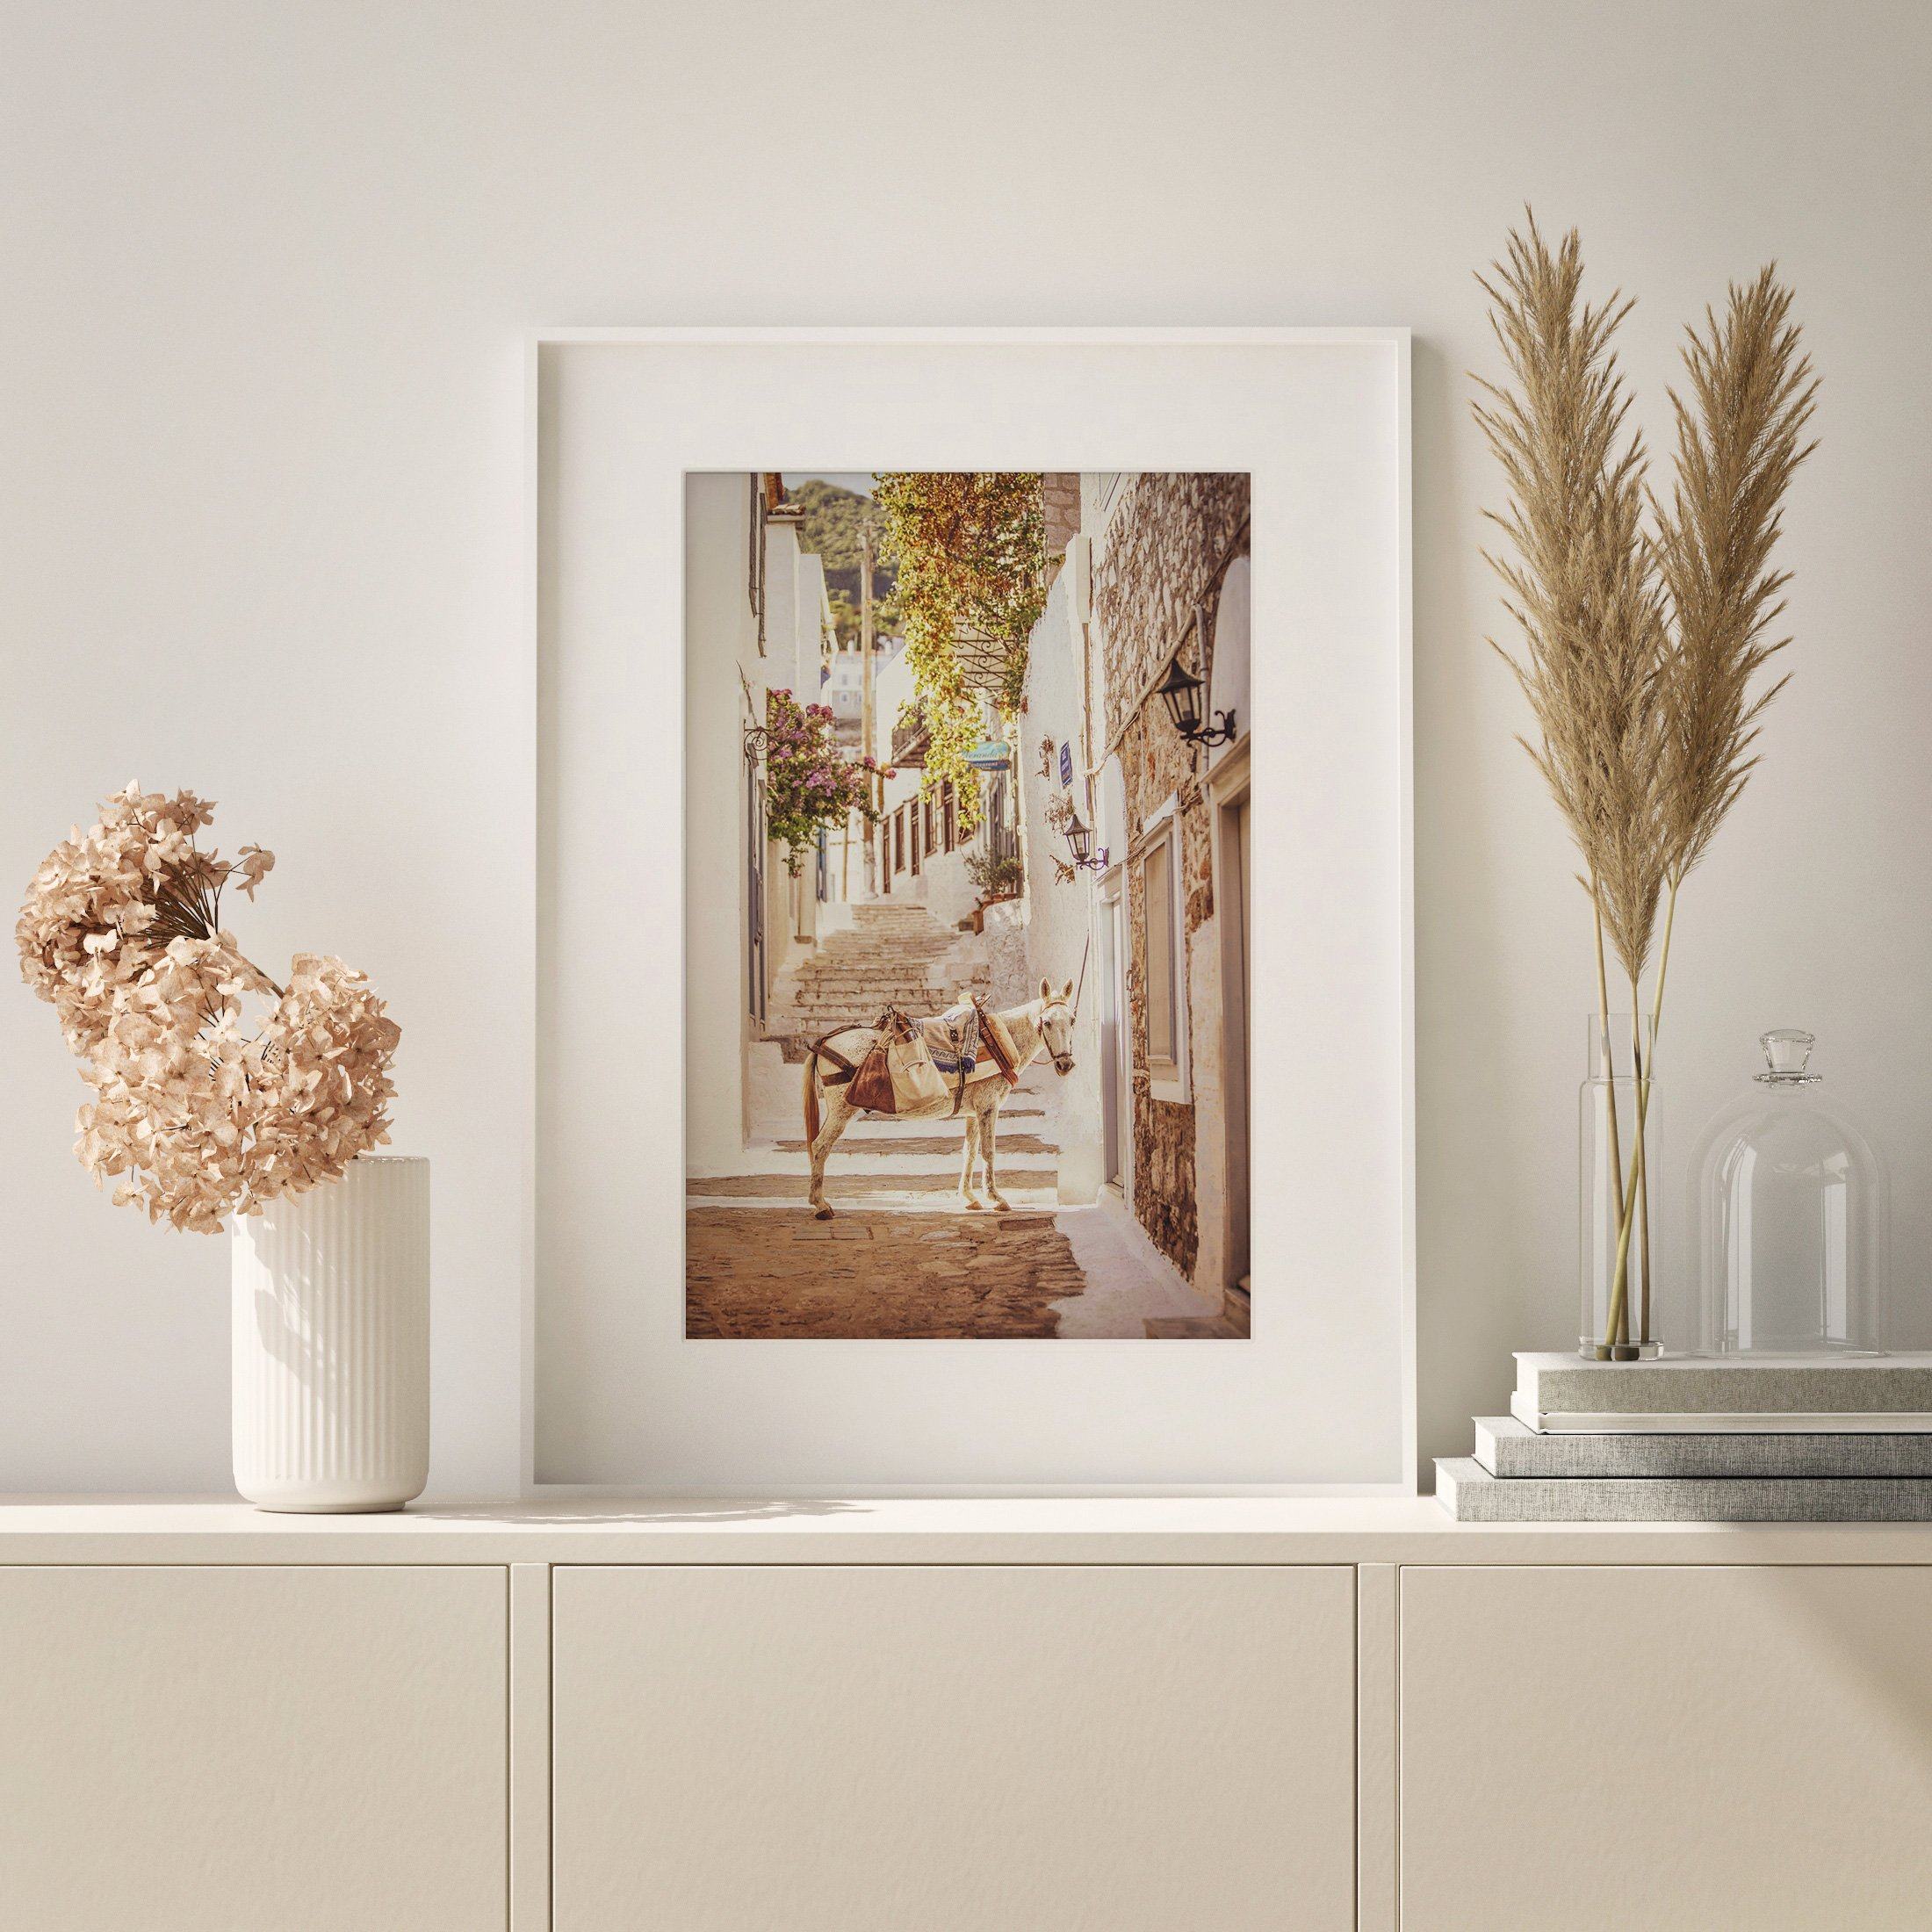 Matted Prints - "Hydra, Greece" | Matted Print